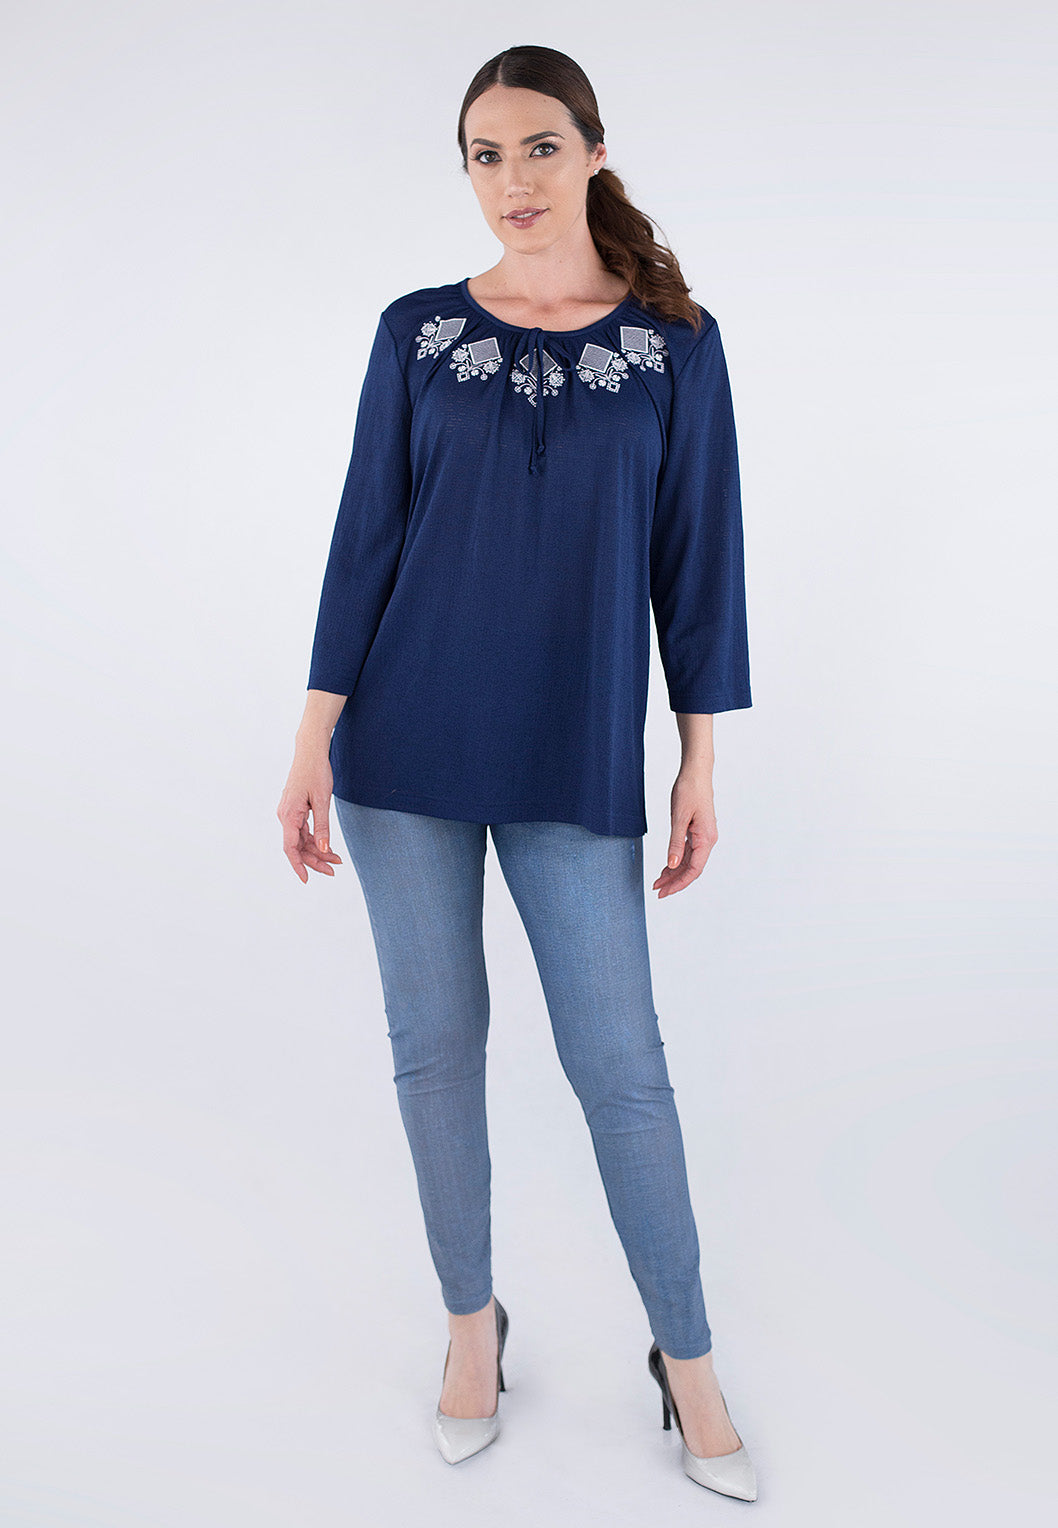 3/4 Sleeve Embroidery Blouse.